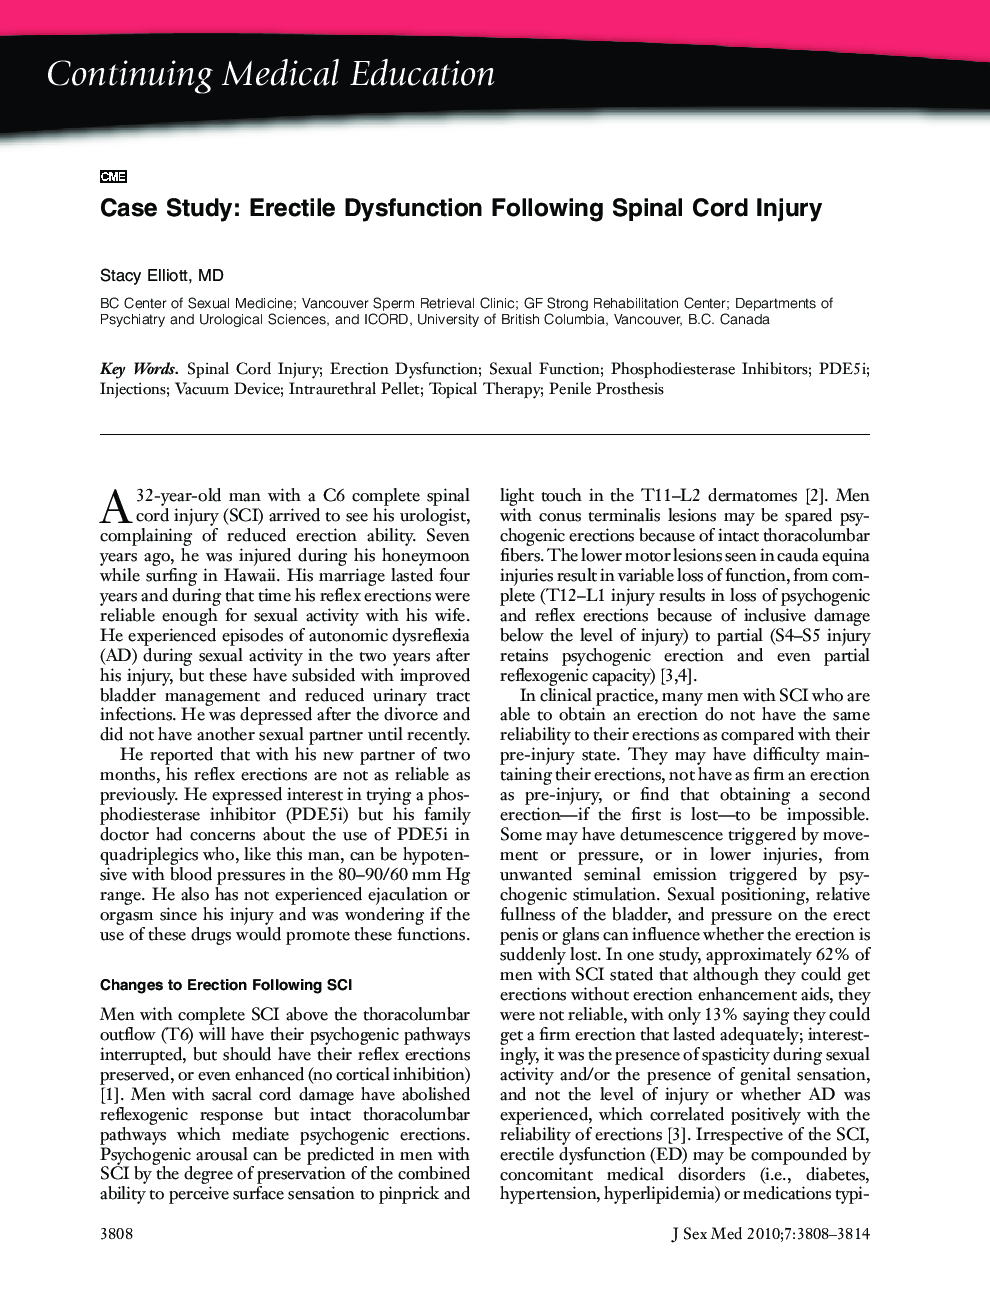 Case Study: Erectile Dysfunction Following Spinal Cord Injury (CME)